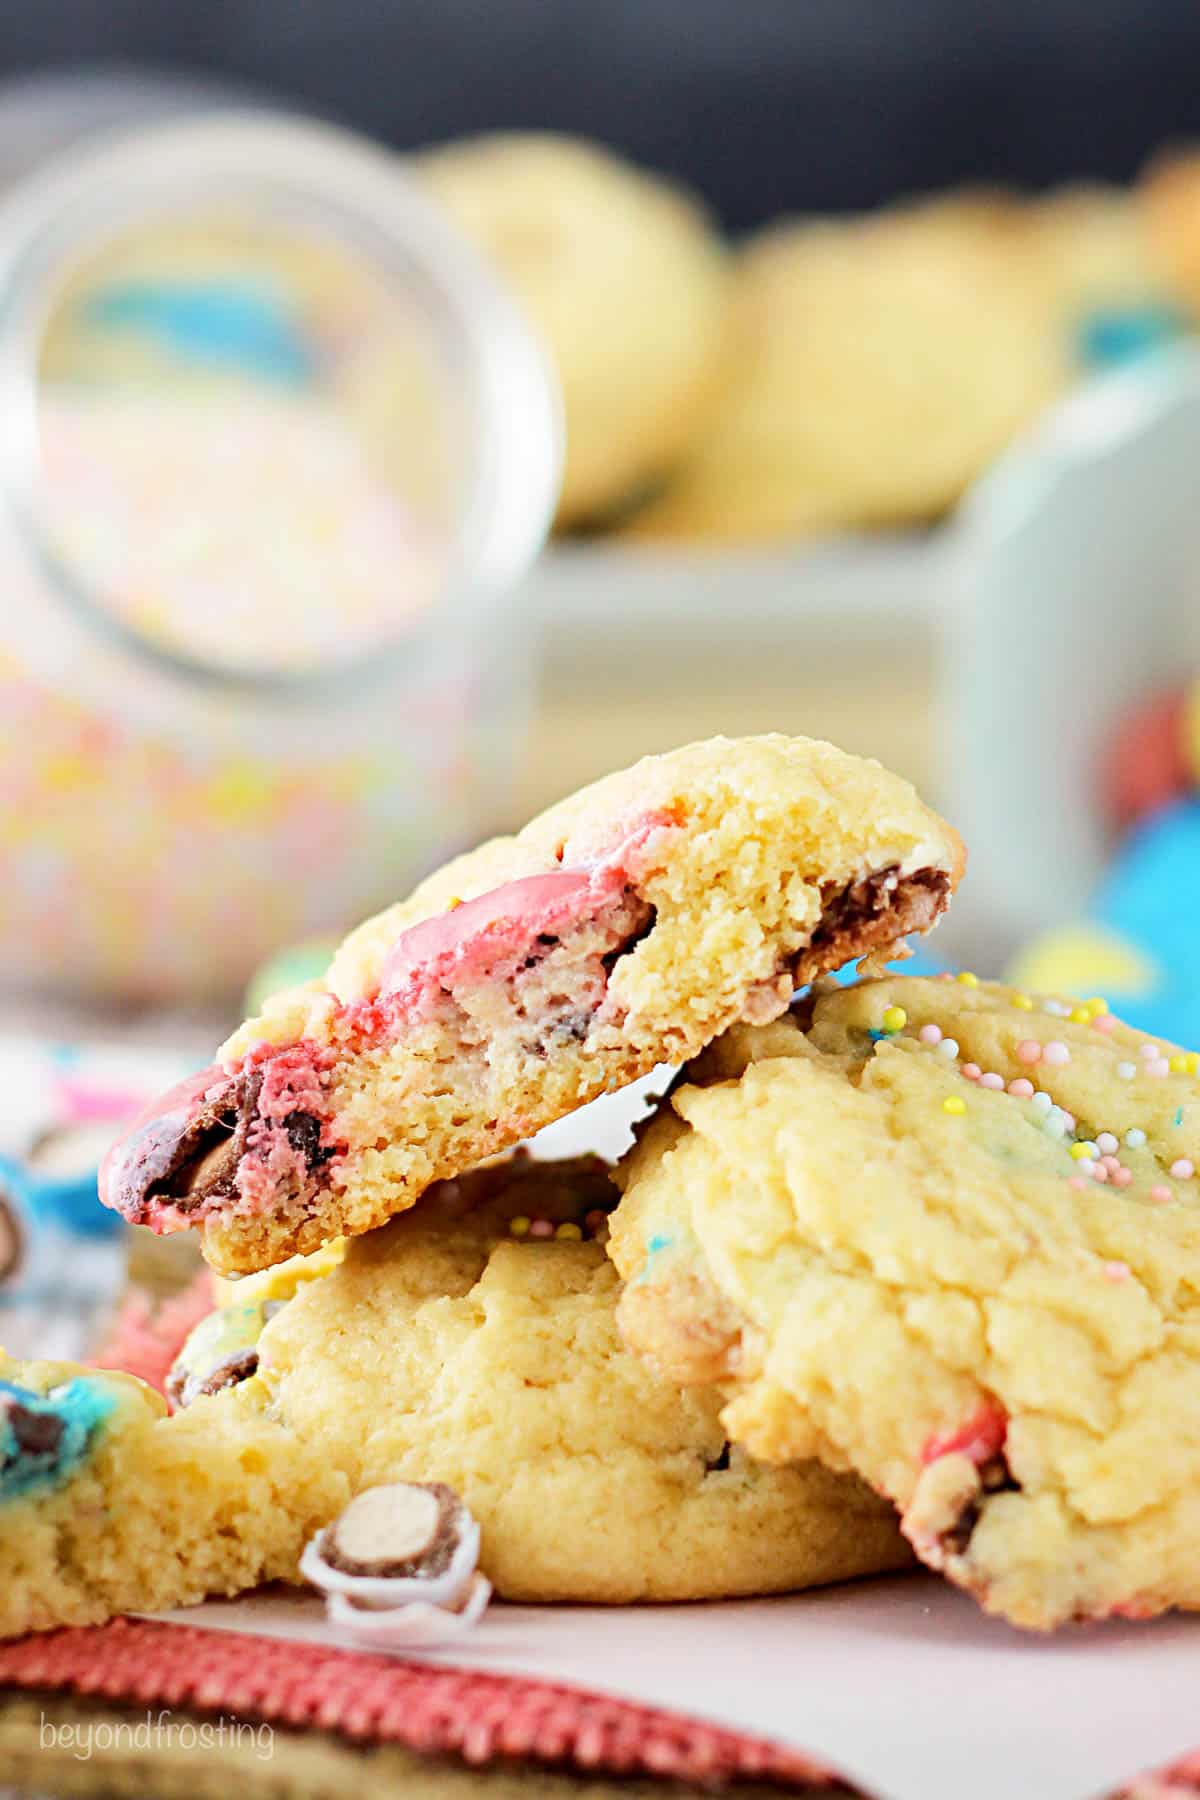 Three malted cheesecake cookies stacked on top of each other with more cookies and candies in the background